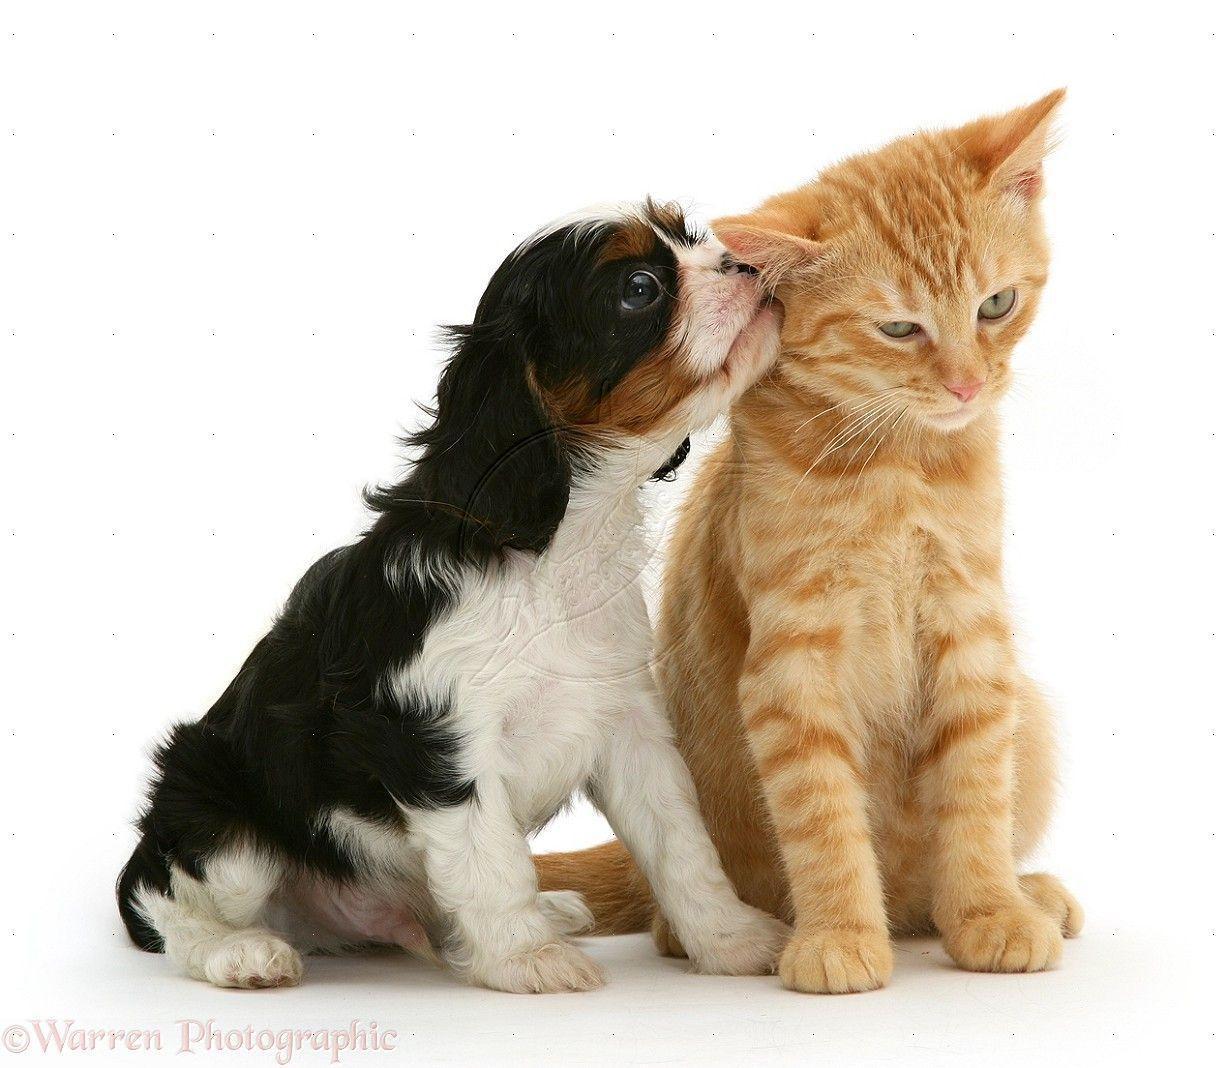 Cute Kittens and Puppies Kissing HD Wallpapers For Desktop